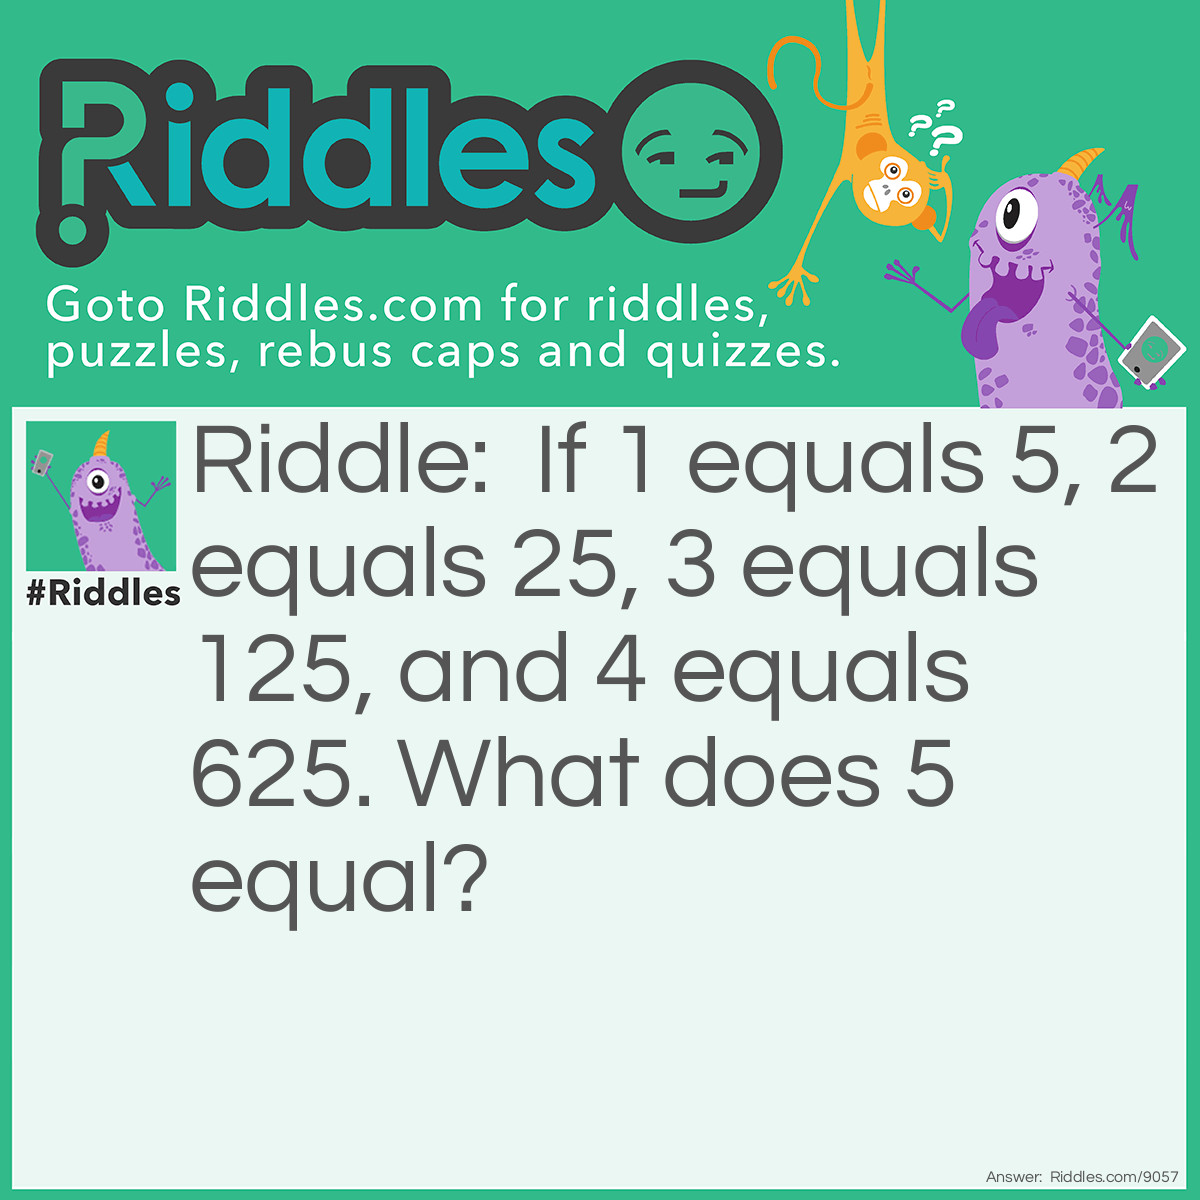 Riddle: If 1 equals 5, 2 equals 25, 3 equals 125, and 4 equals 625. What does 5 equal? Answer: The answer is 1, because 1=5.